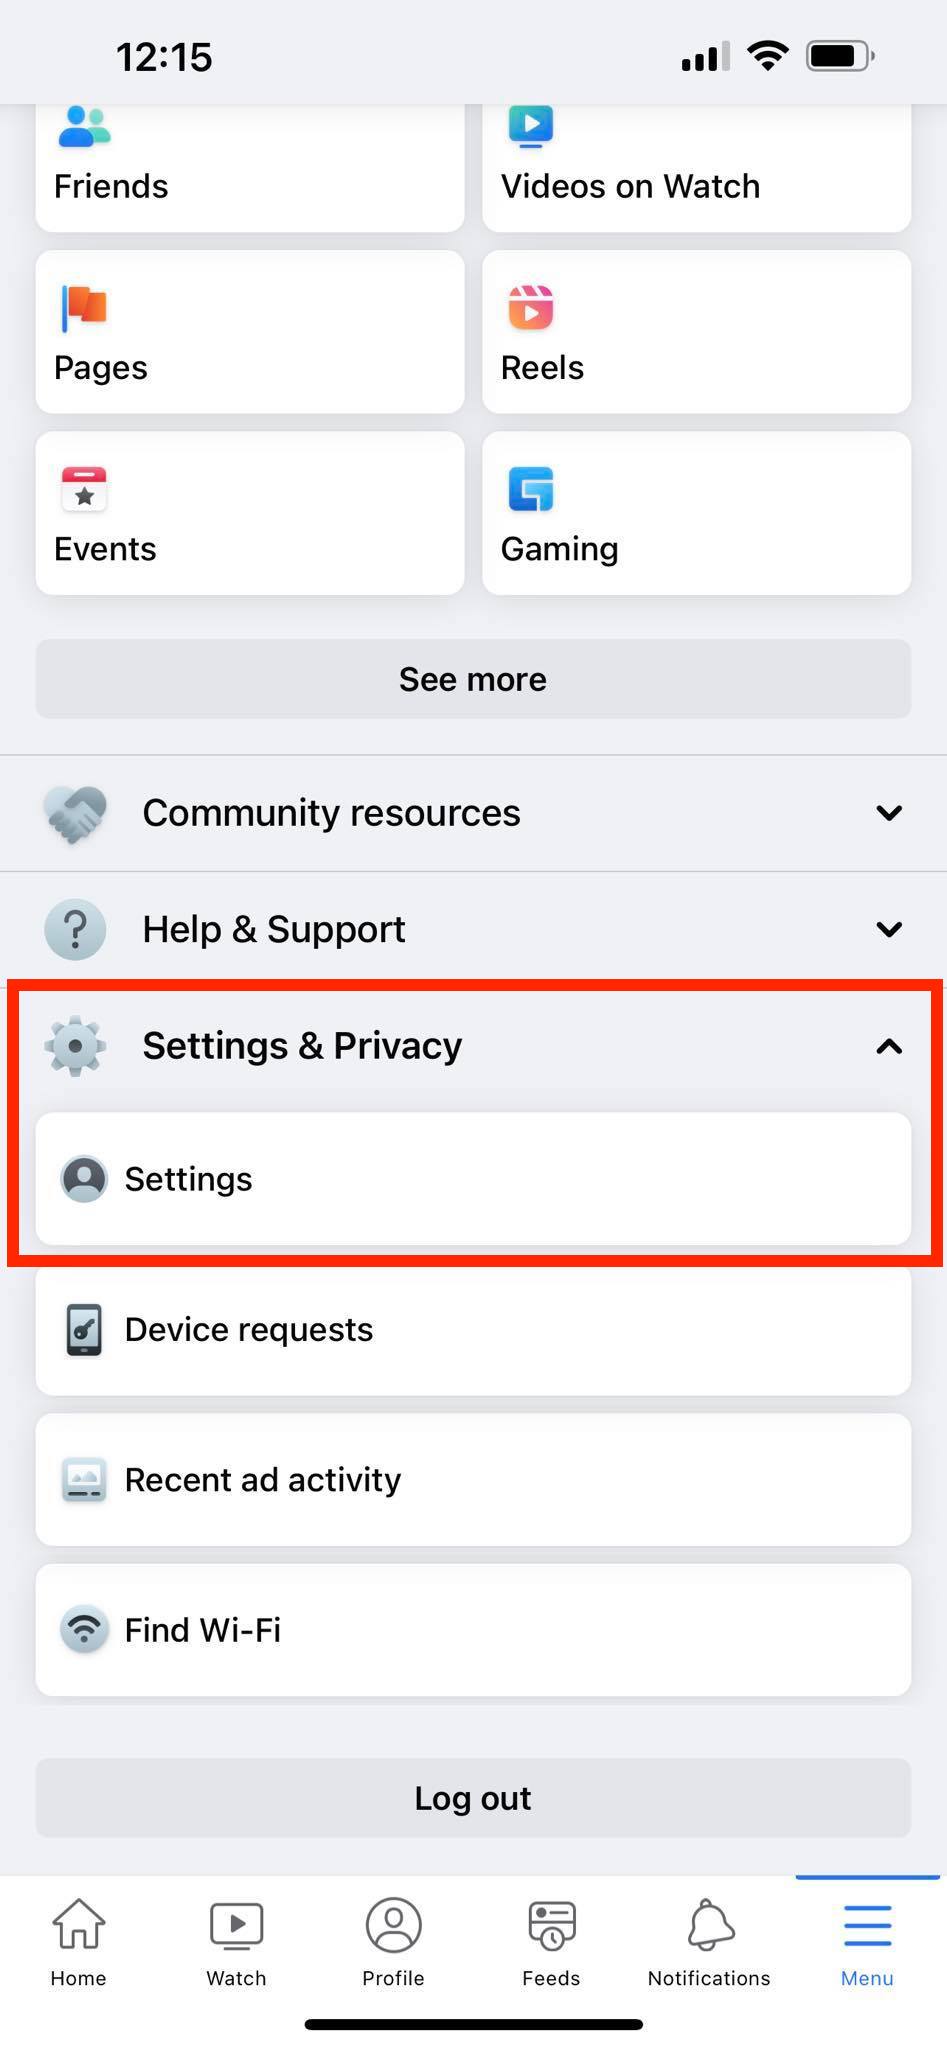 facebook settings and privacy